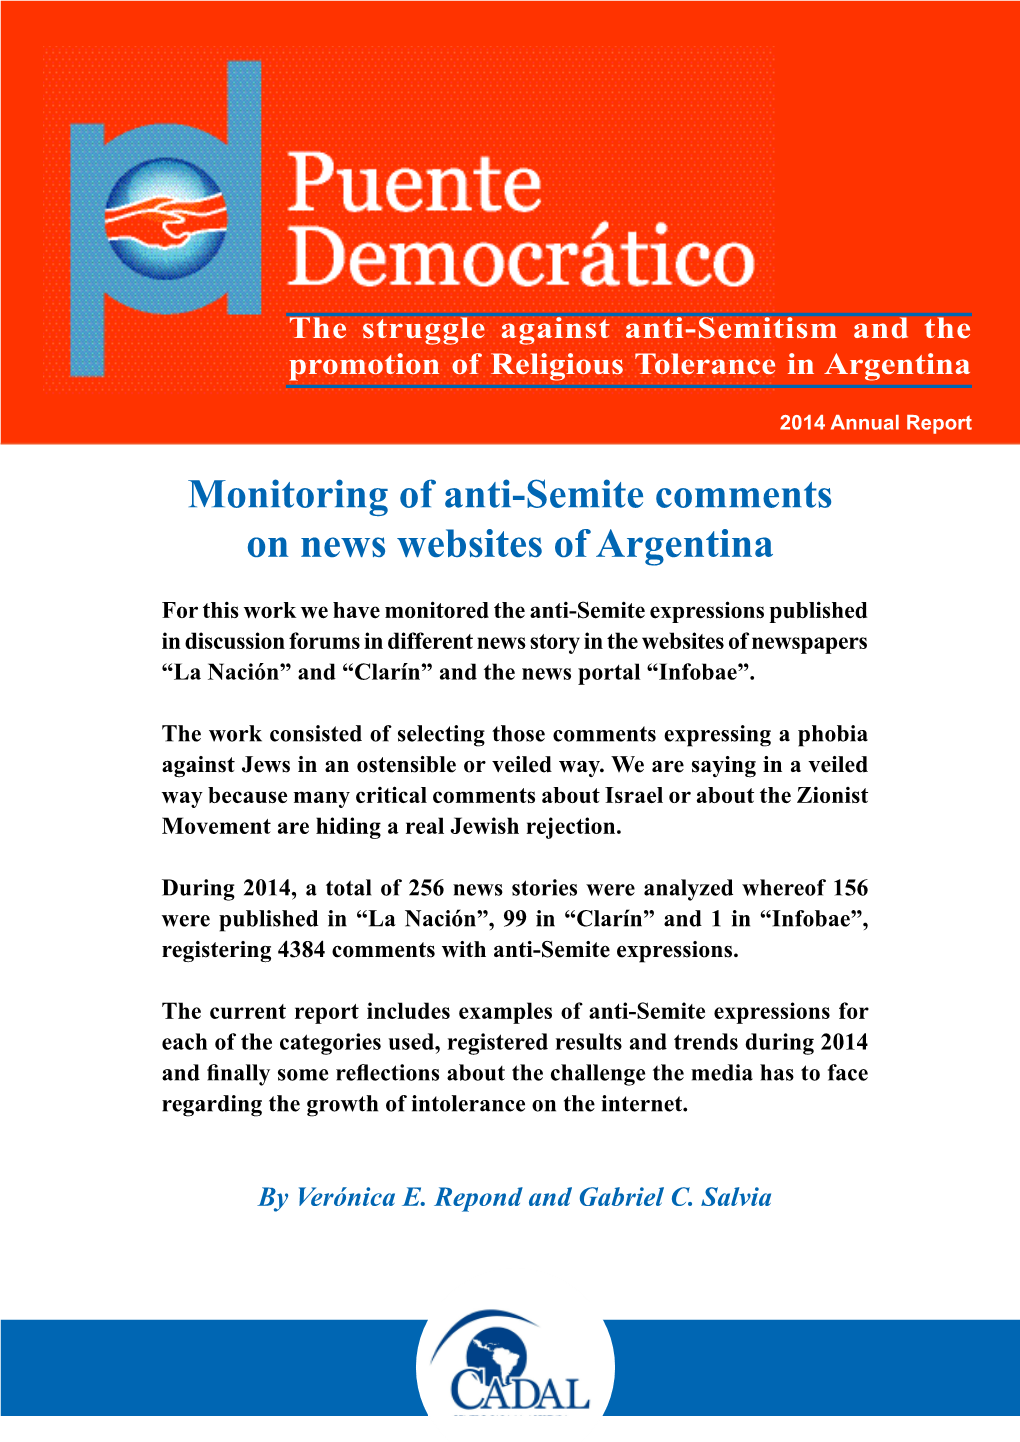 Monitoring of Anti-Semite Comments on News Websites of Argentina